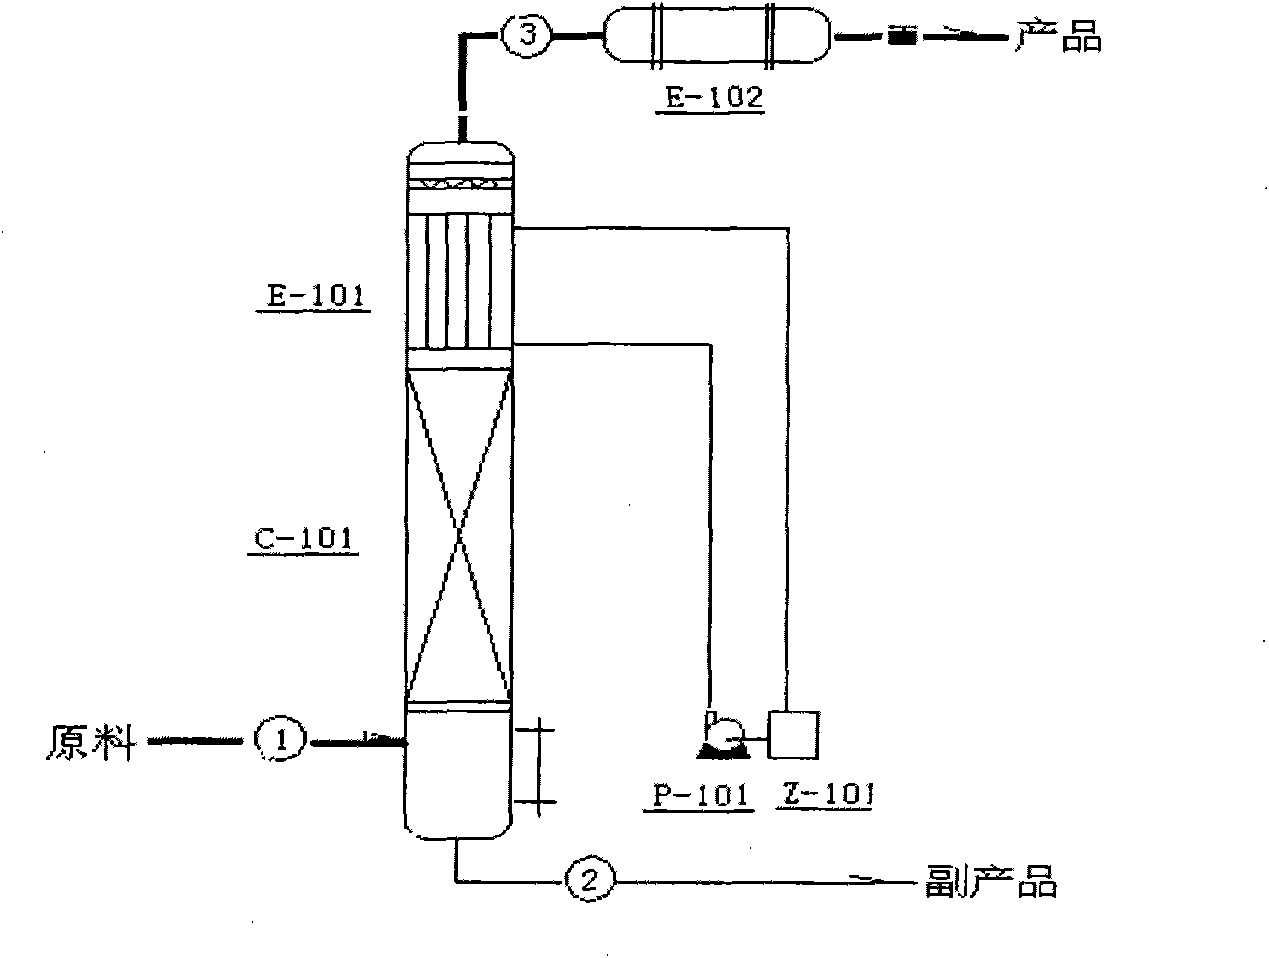 Method and system for preparing anhydrous hydrogen chloride gas